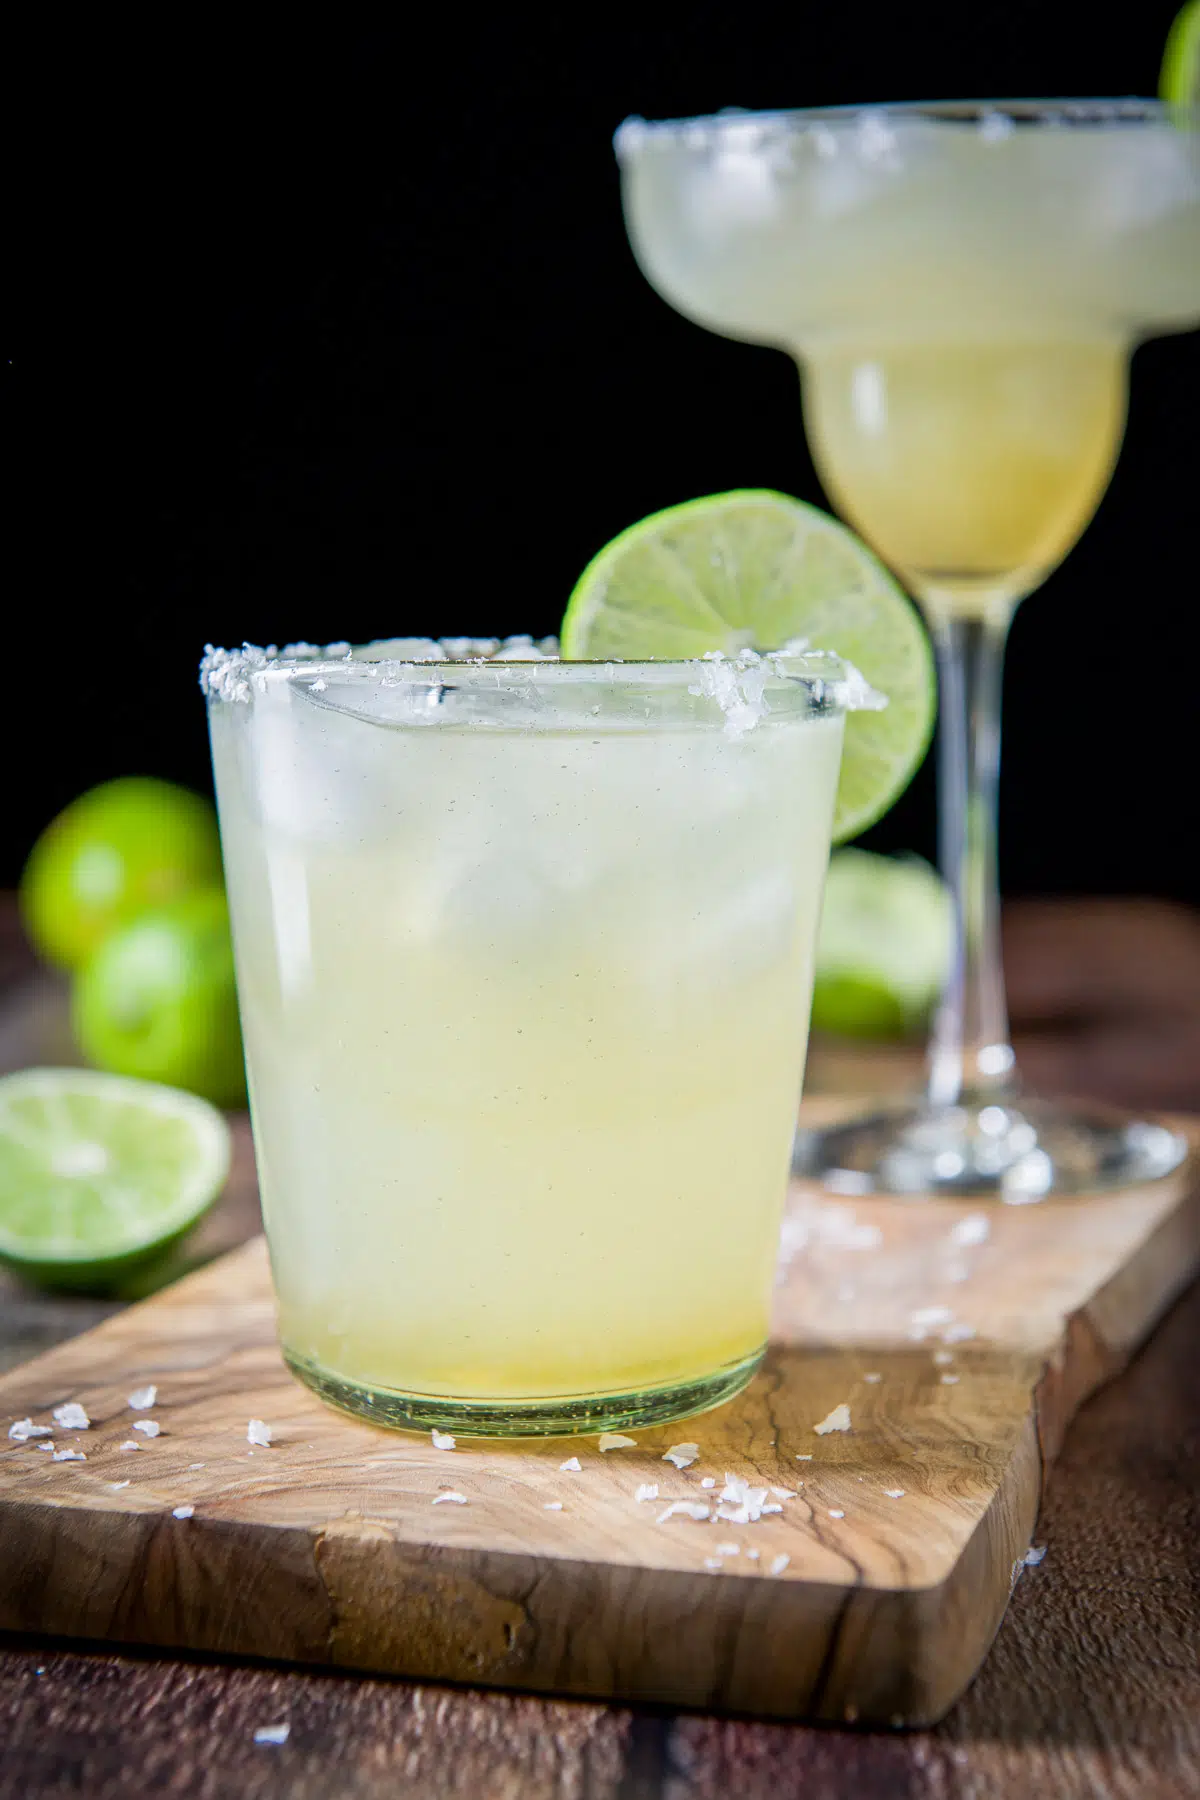 Vertical view of two margarita glasses filled with amber liquid and limes in the back